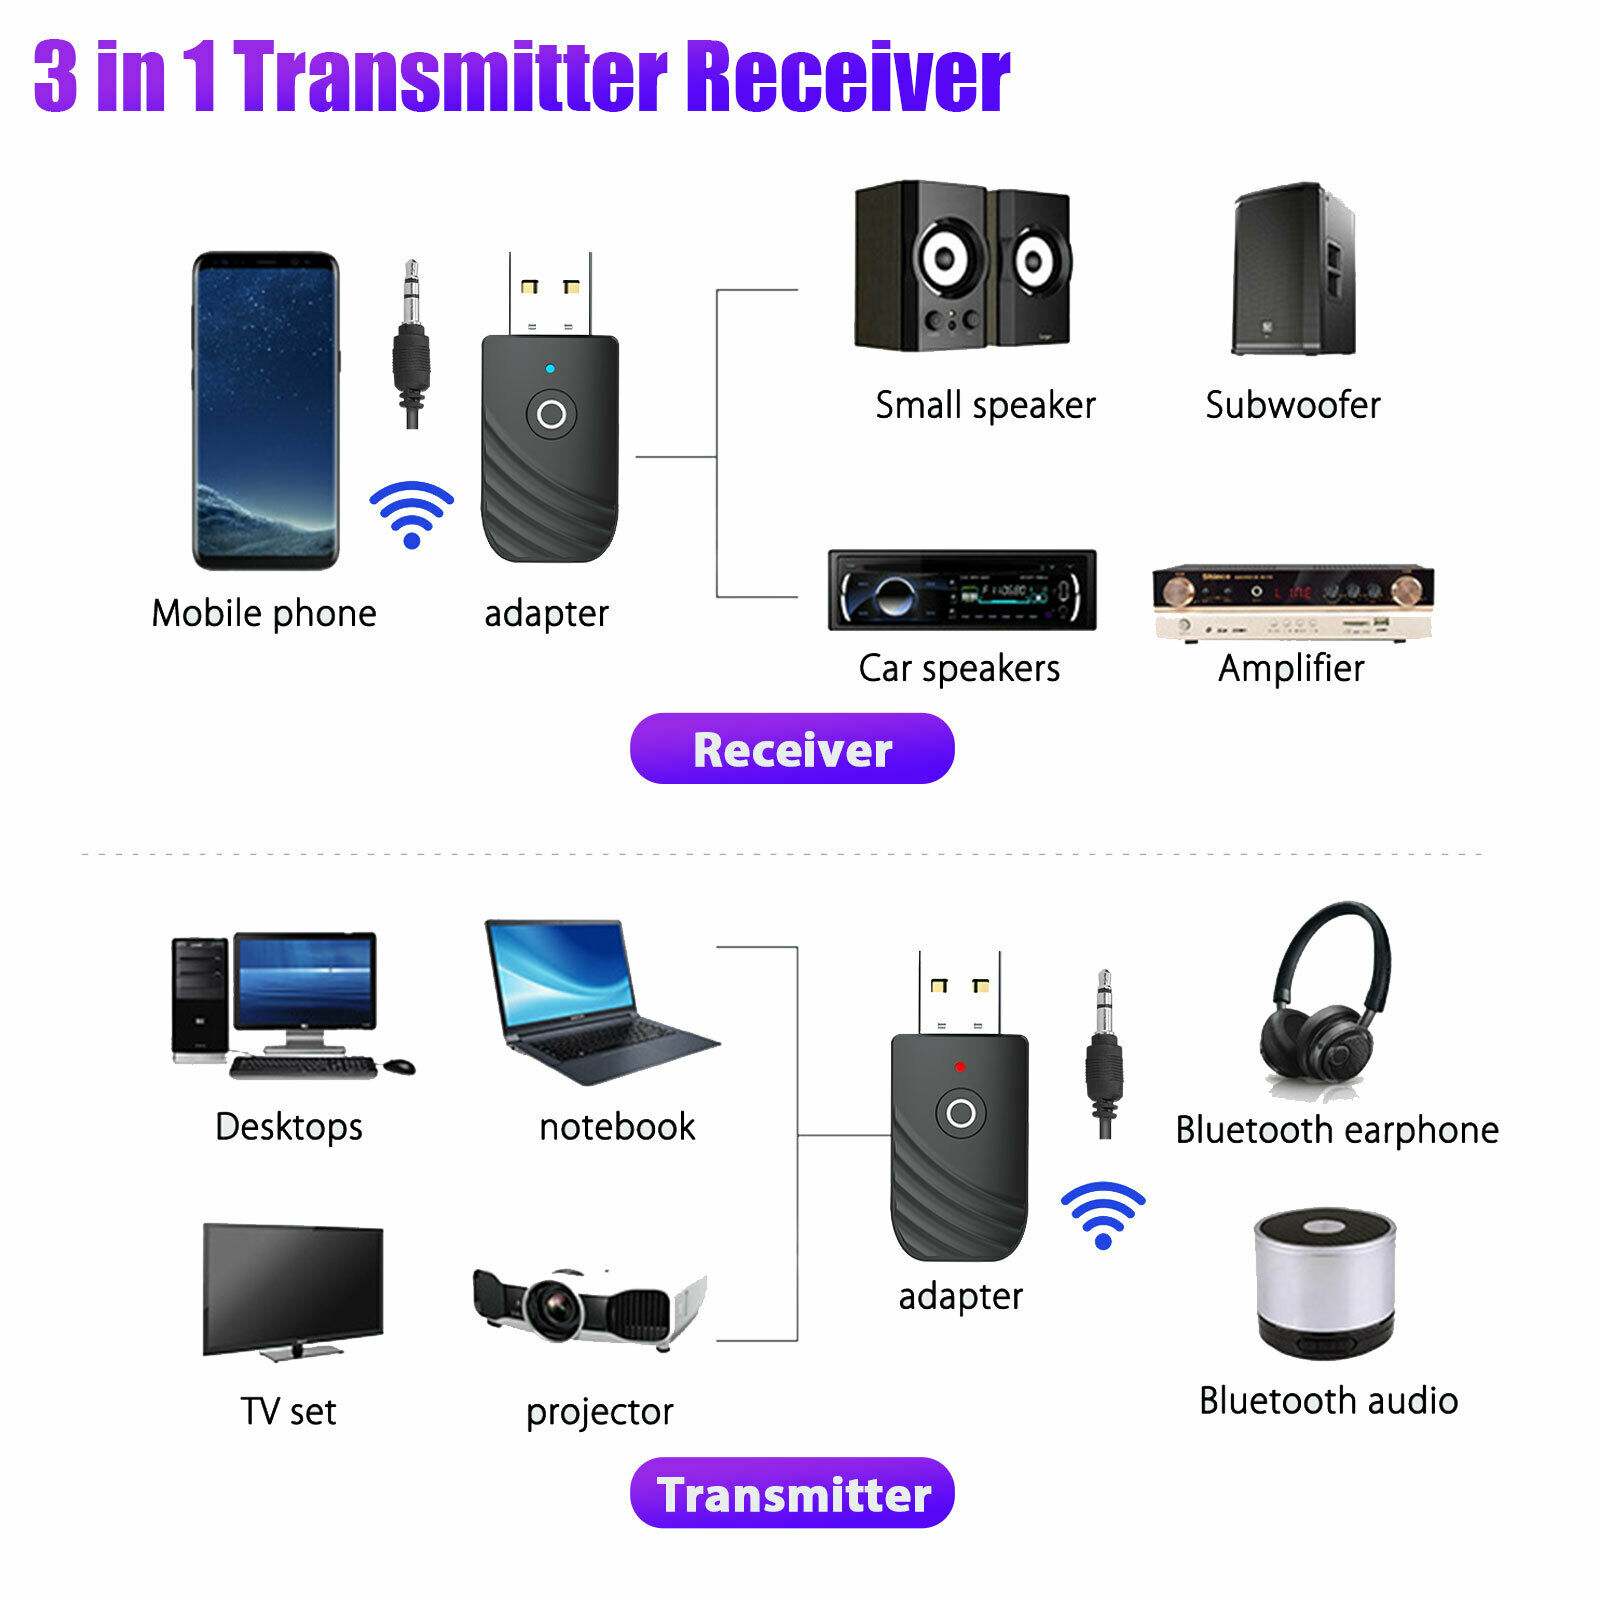 SY319-Wireless-USB-Bluetooth-50-Audio-Transmitter-Receiver-3-In-1-Adapter-For-TV-PC-Car-1850380-2